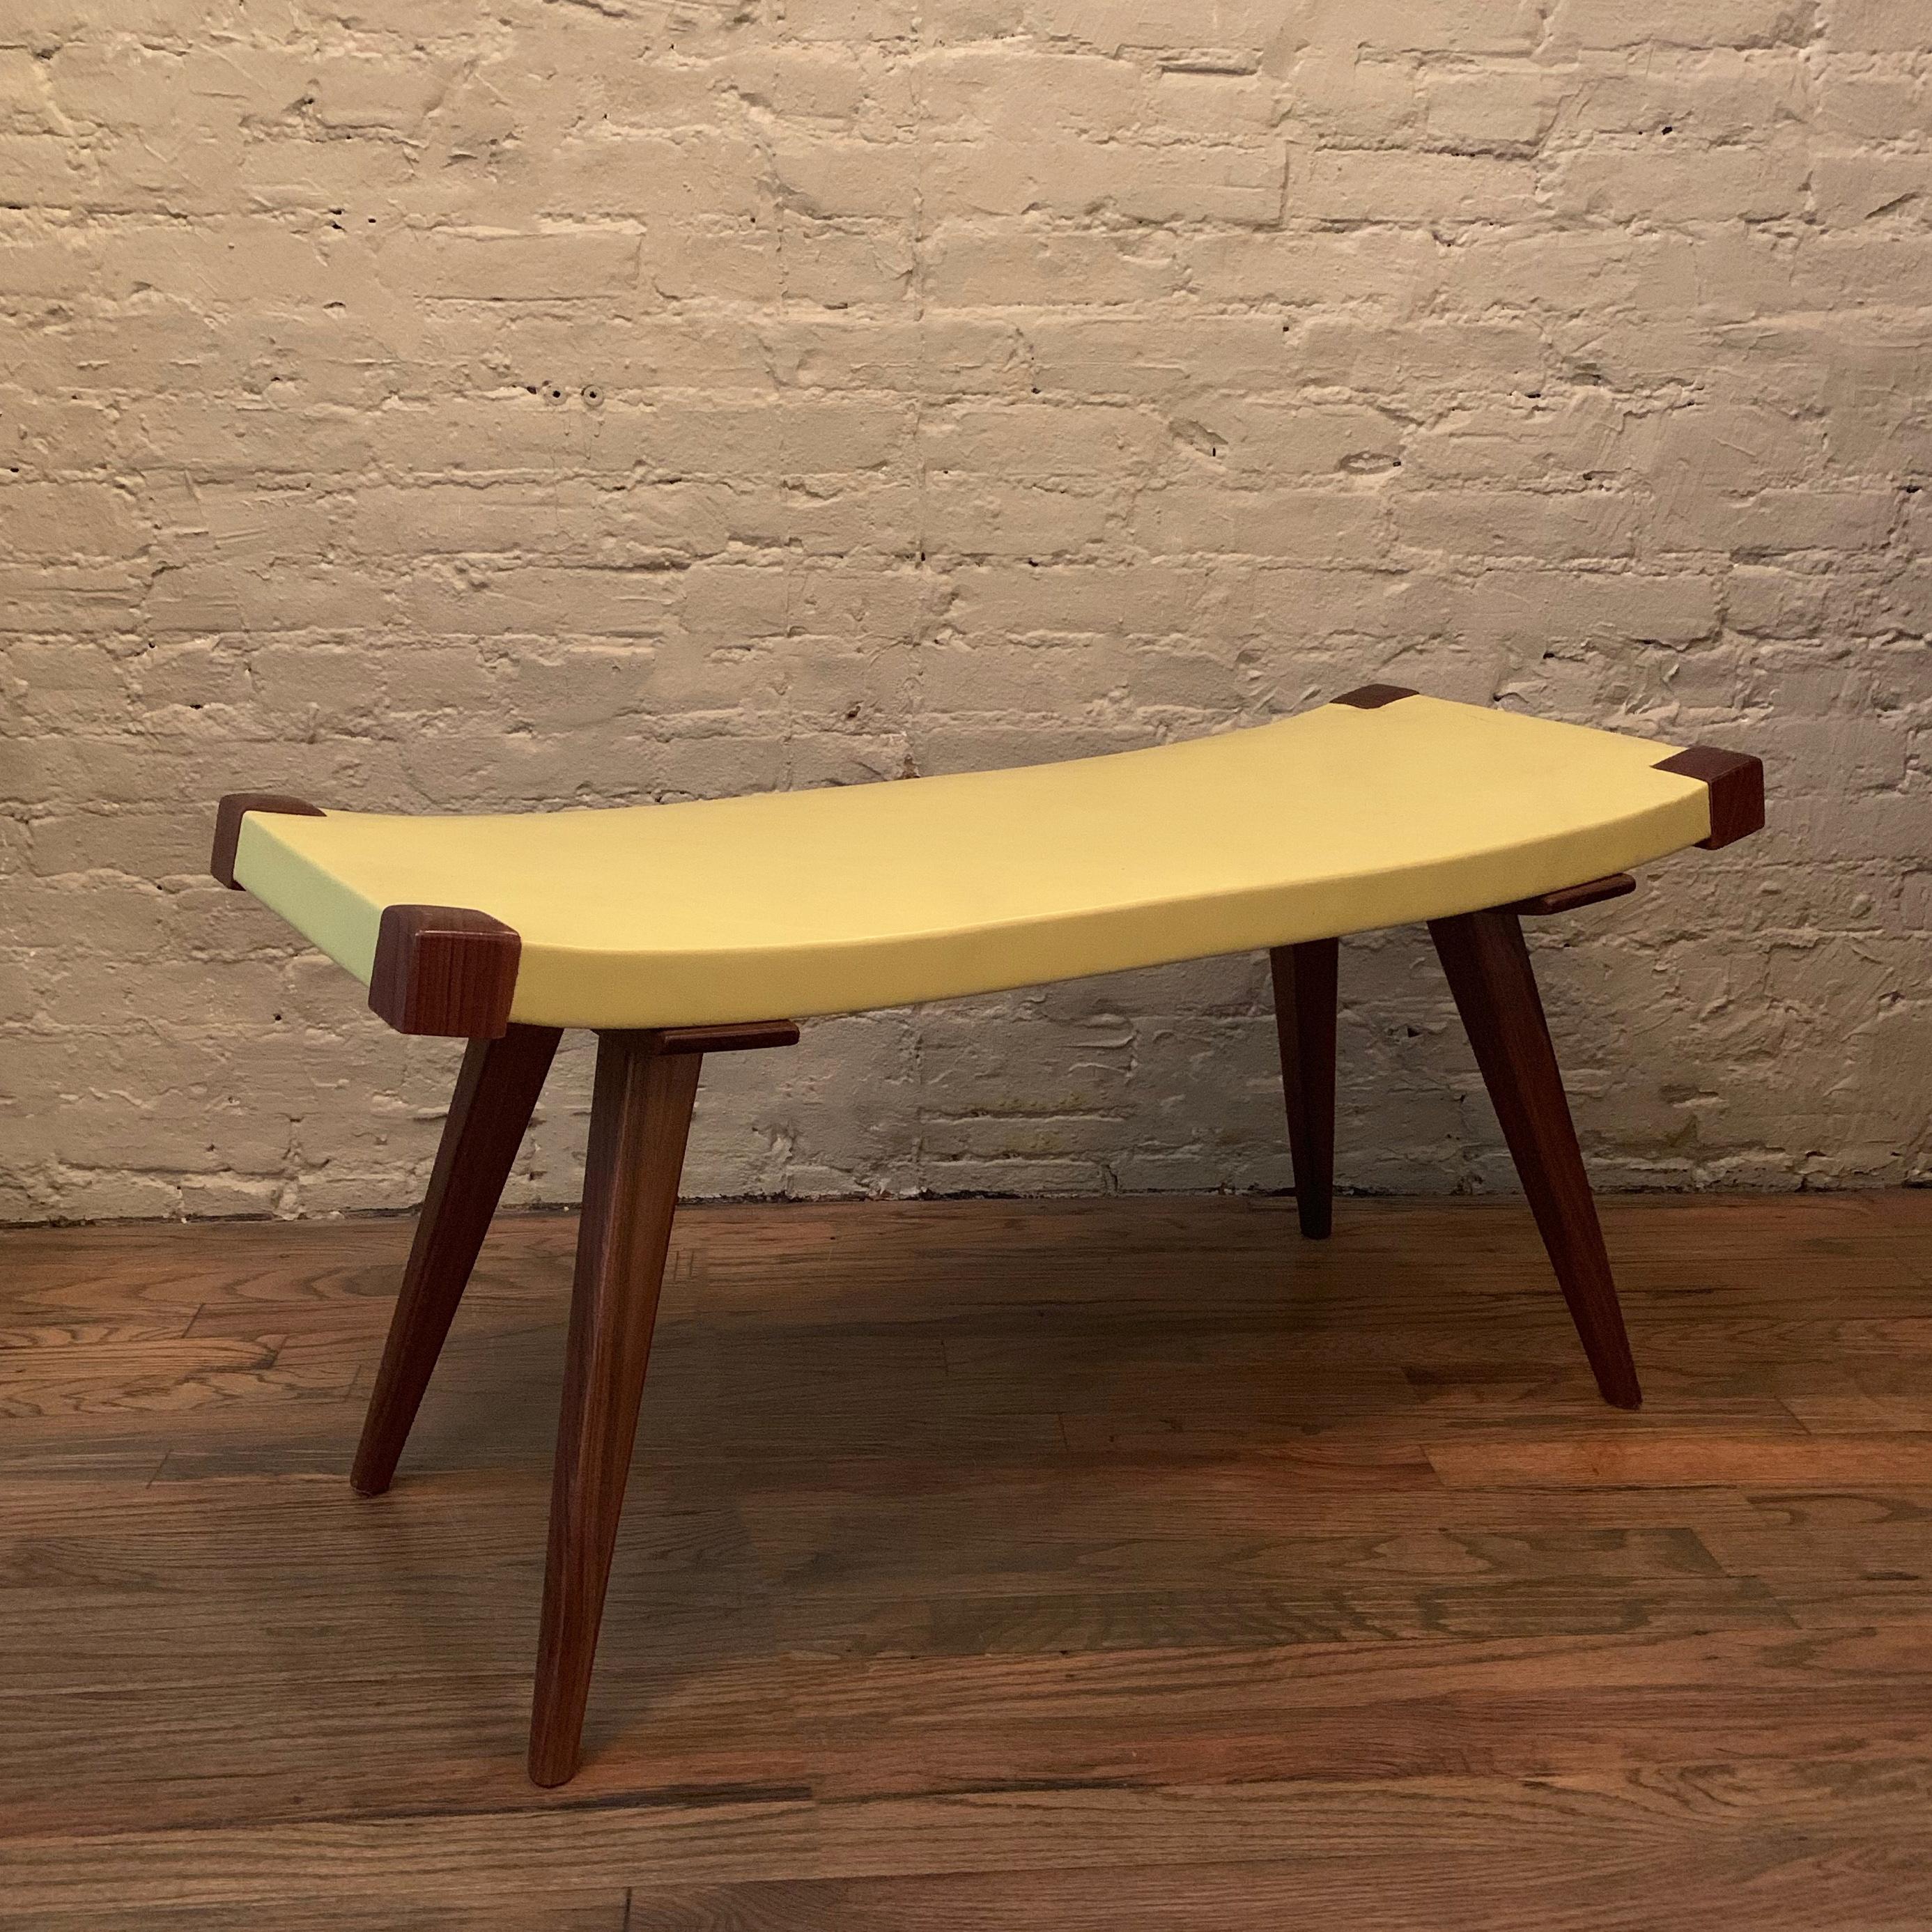 Custom, Mid-Century Modern style bench features walnut and ash tapered legs with a gently sloping, yellow leather seat, made in Brooklyn, NY by City Foundry.